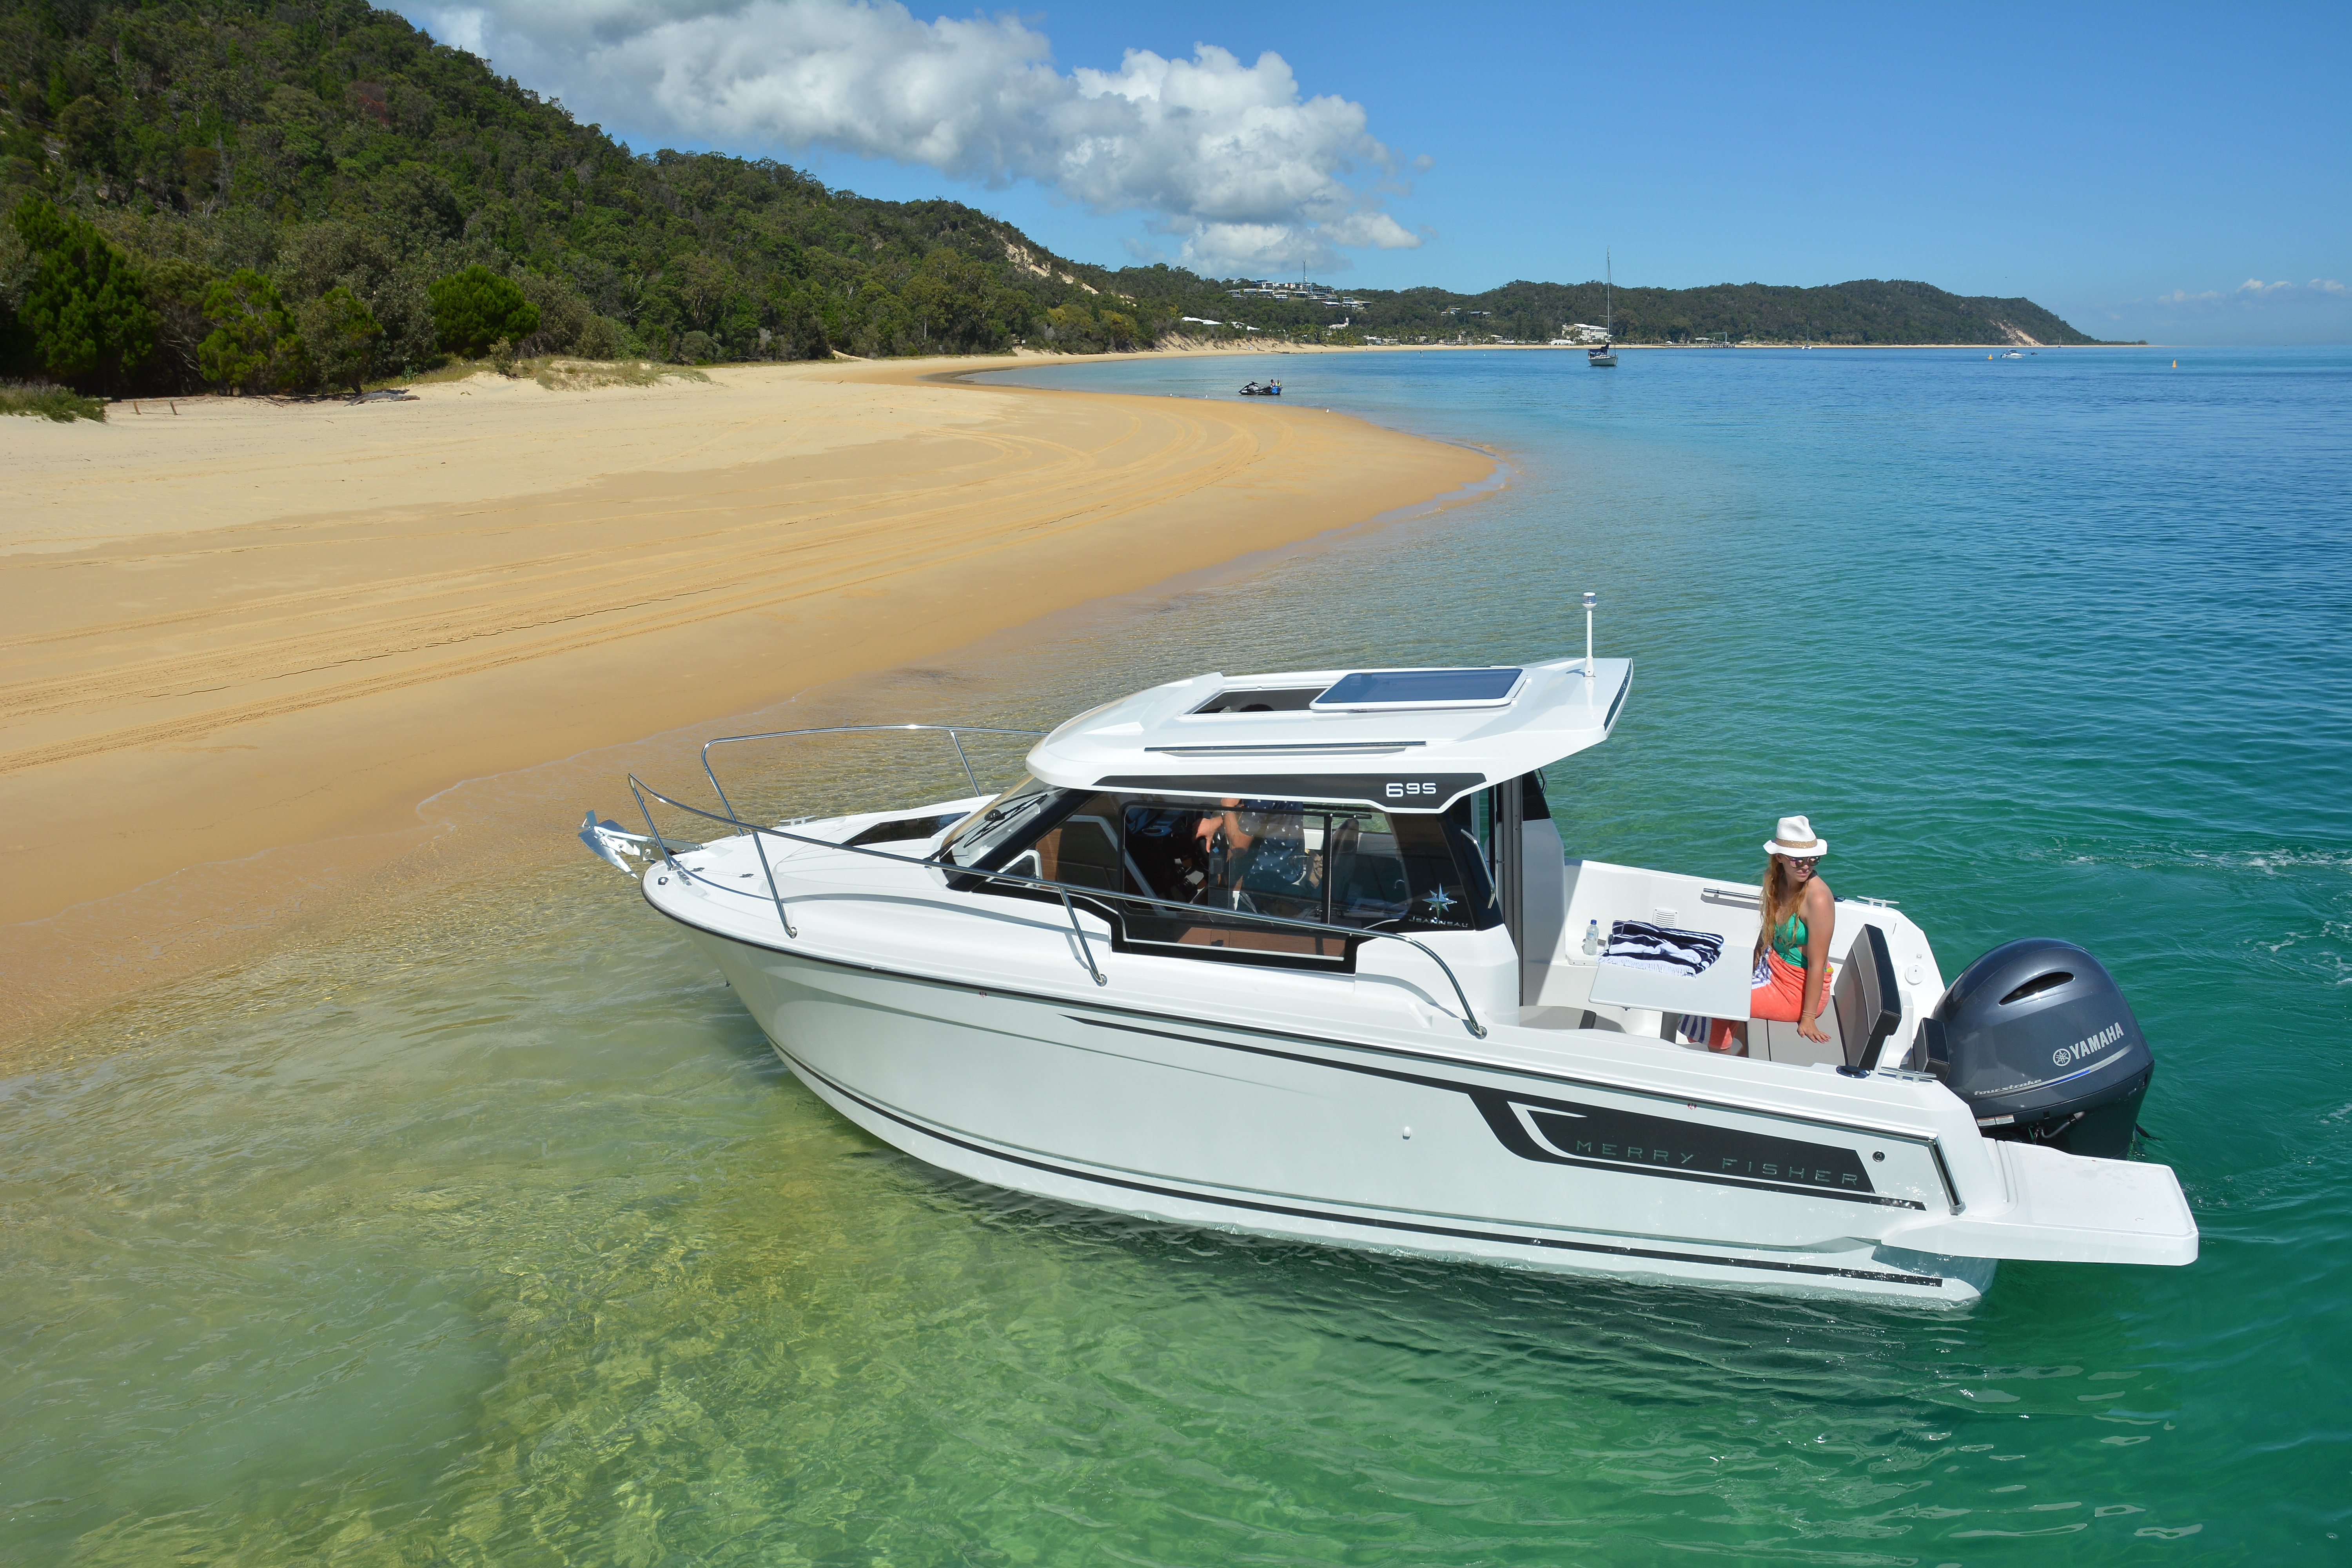 The new Merry Fisher 695 Series 2 beached up on a secluded beach with clear blue water all around.